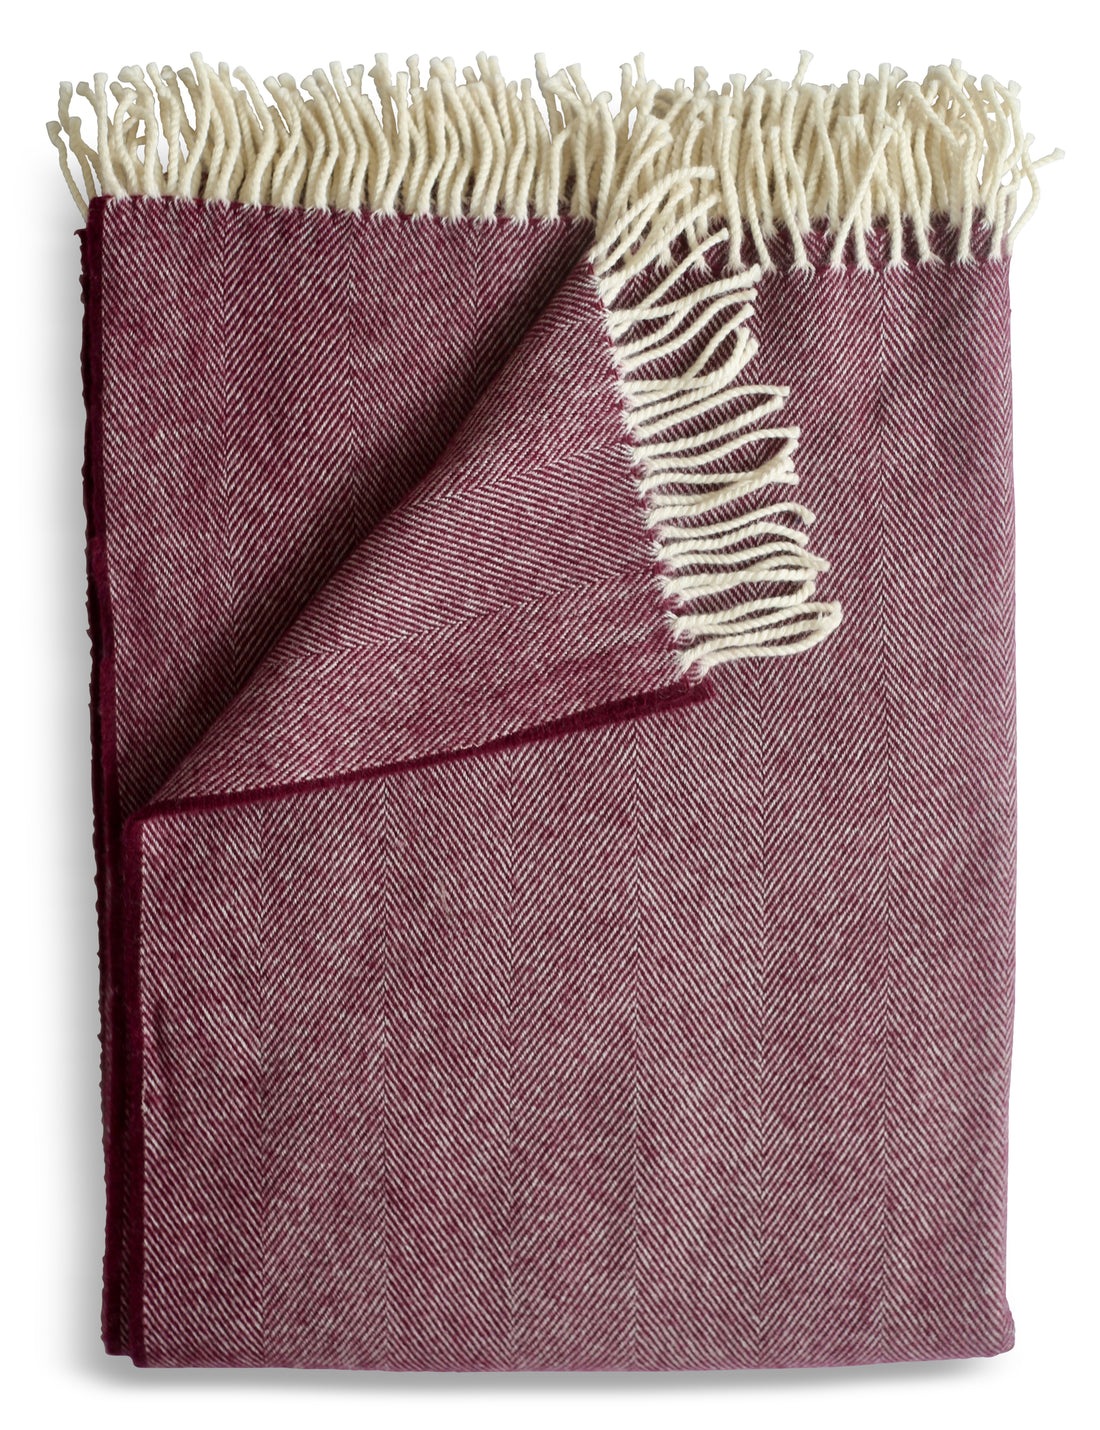 Evangeline lightweight herringbone throw with tasseled edge in color Blackberry, folded against a white background. The lighter weight 'sibling' to our popular Herringbone Throws.  Oh-so-soft. And perfect for summer nights.  